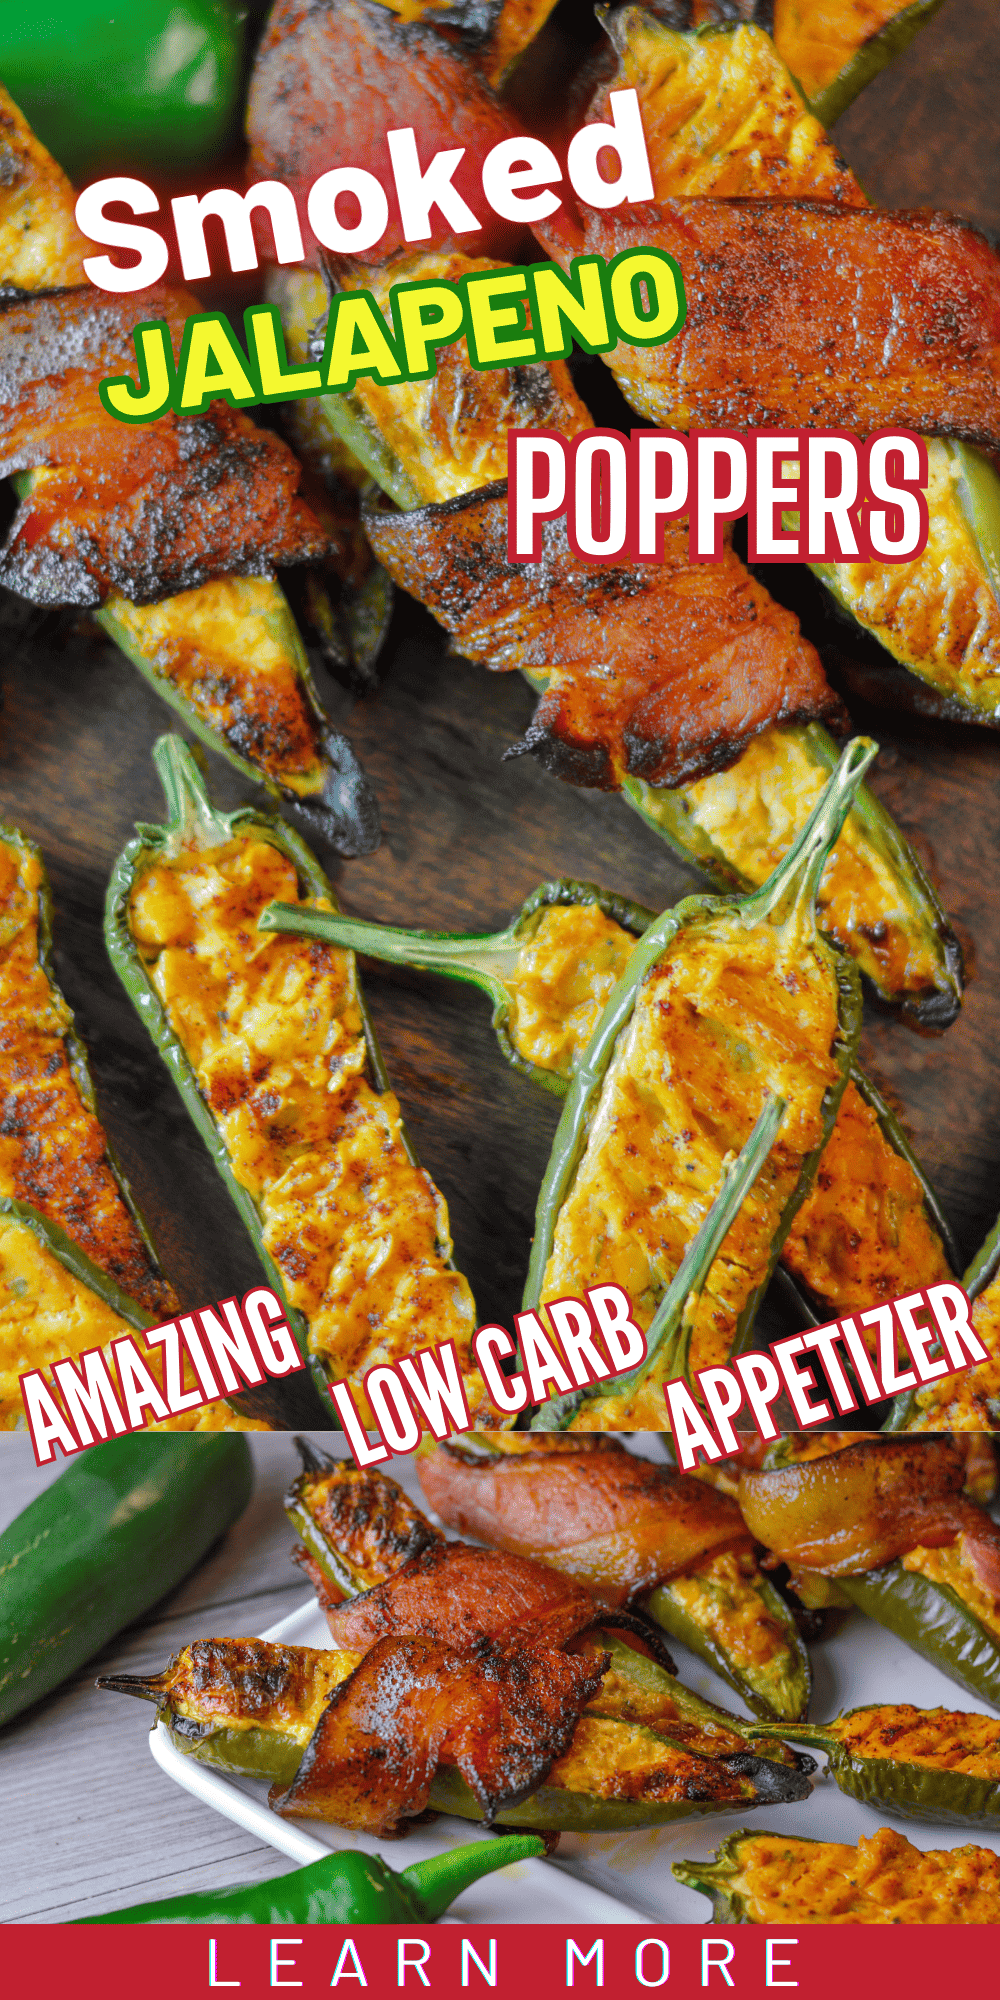 Smoked Jalapeno Poppers "Amazing Low Carb Appetizer" Pinterest Pin with Plain (below and bacon-wrapped jalapeno poppers (above) on a dark brown wooden board